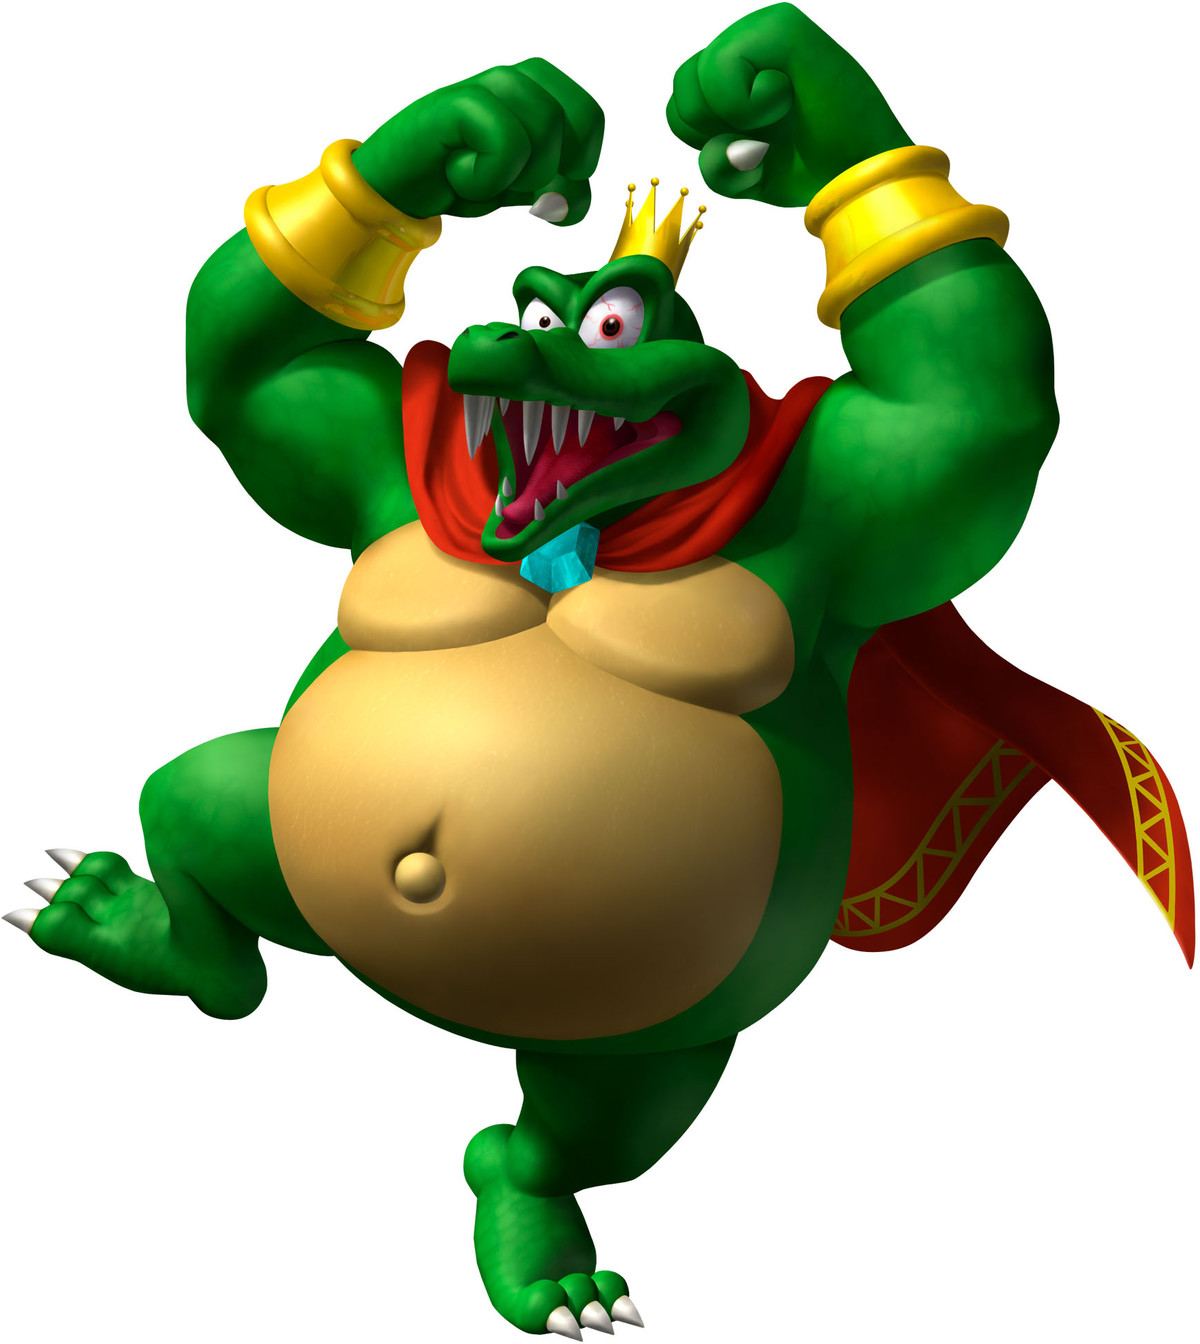 What if King K. Rool will join a party with Mario and his friends, why not ...